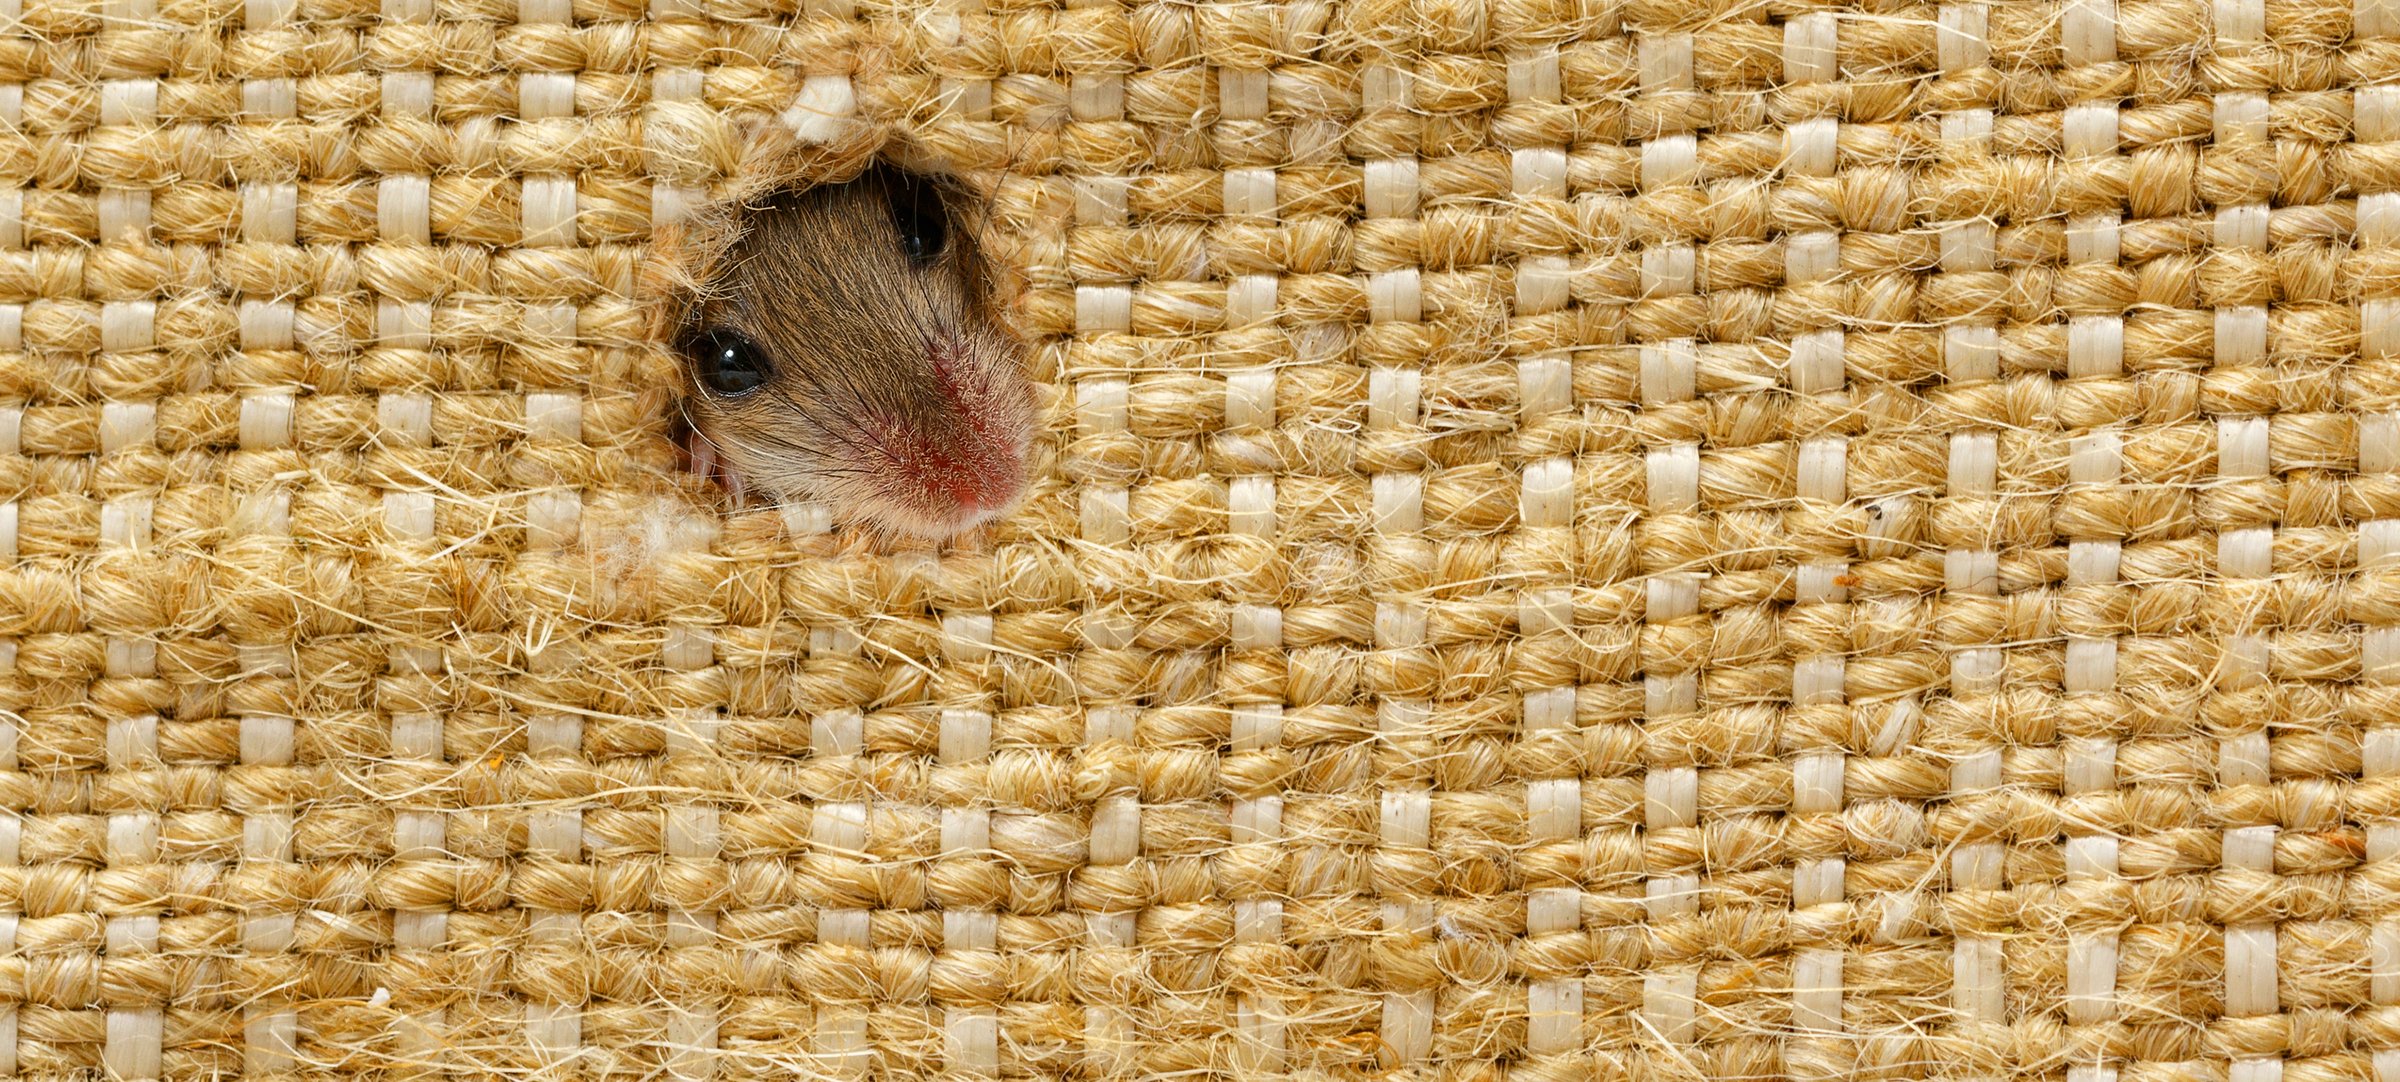 Tips for Keeping the Rodents Out This Winter